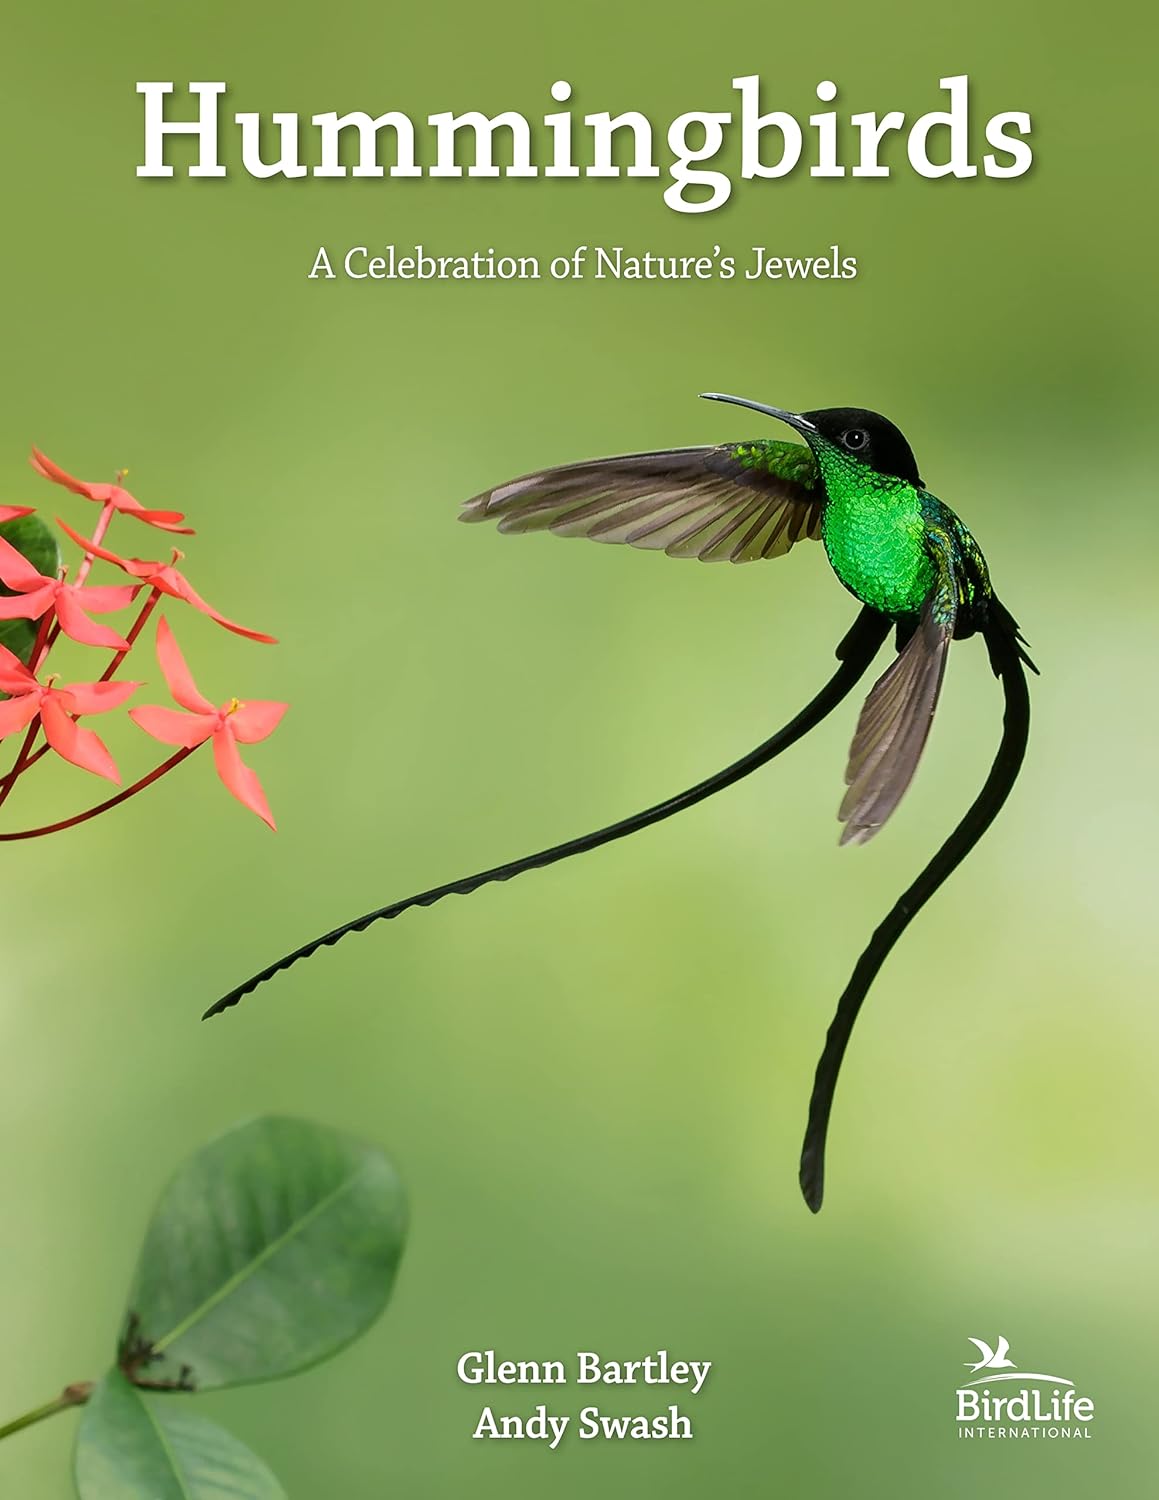 books about hummingbirds7